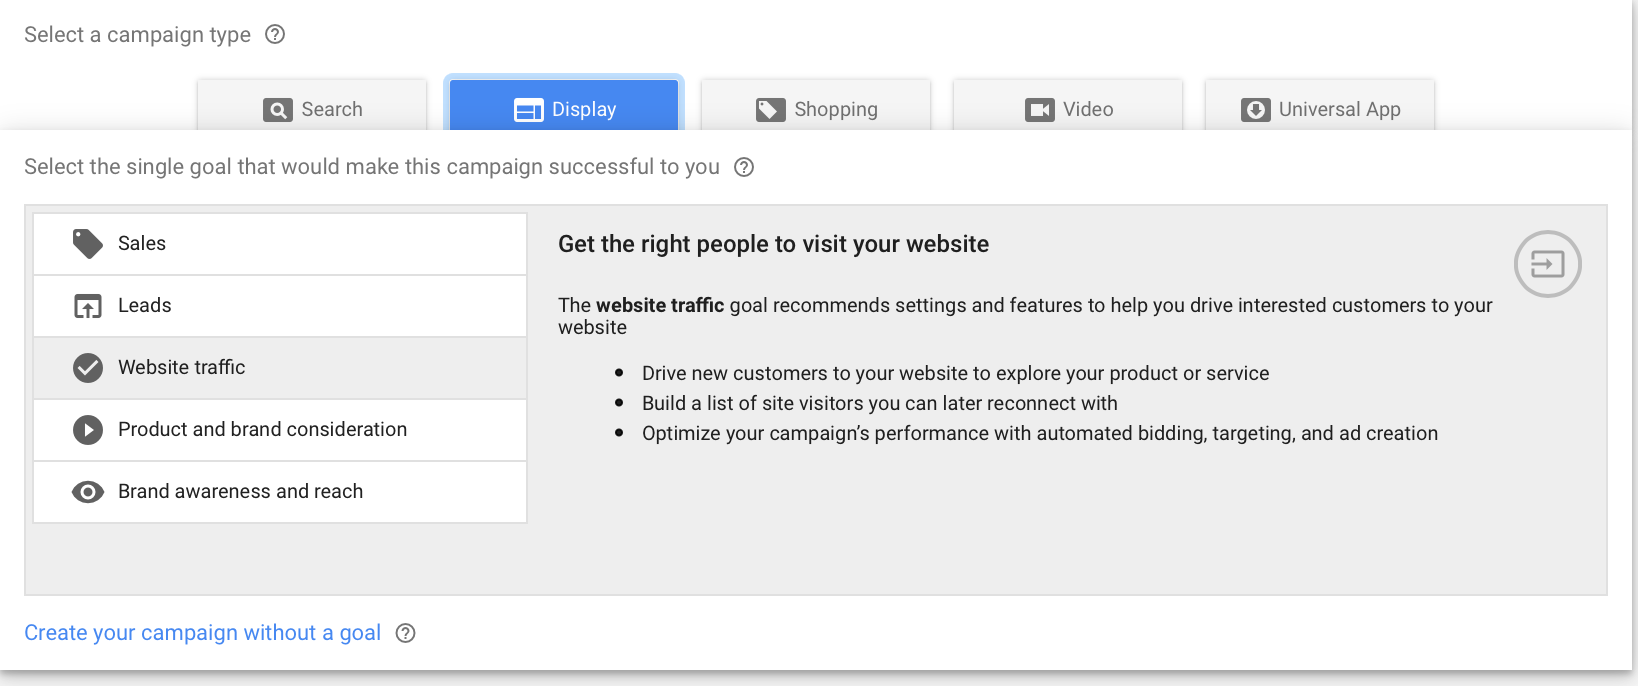 How to Get the Best Results with Google AdSense Video Ads | DeviceDaily.com